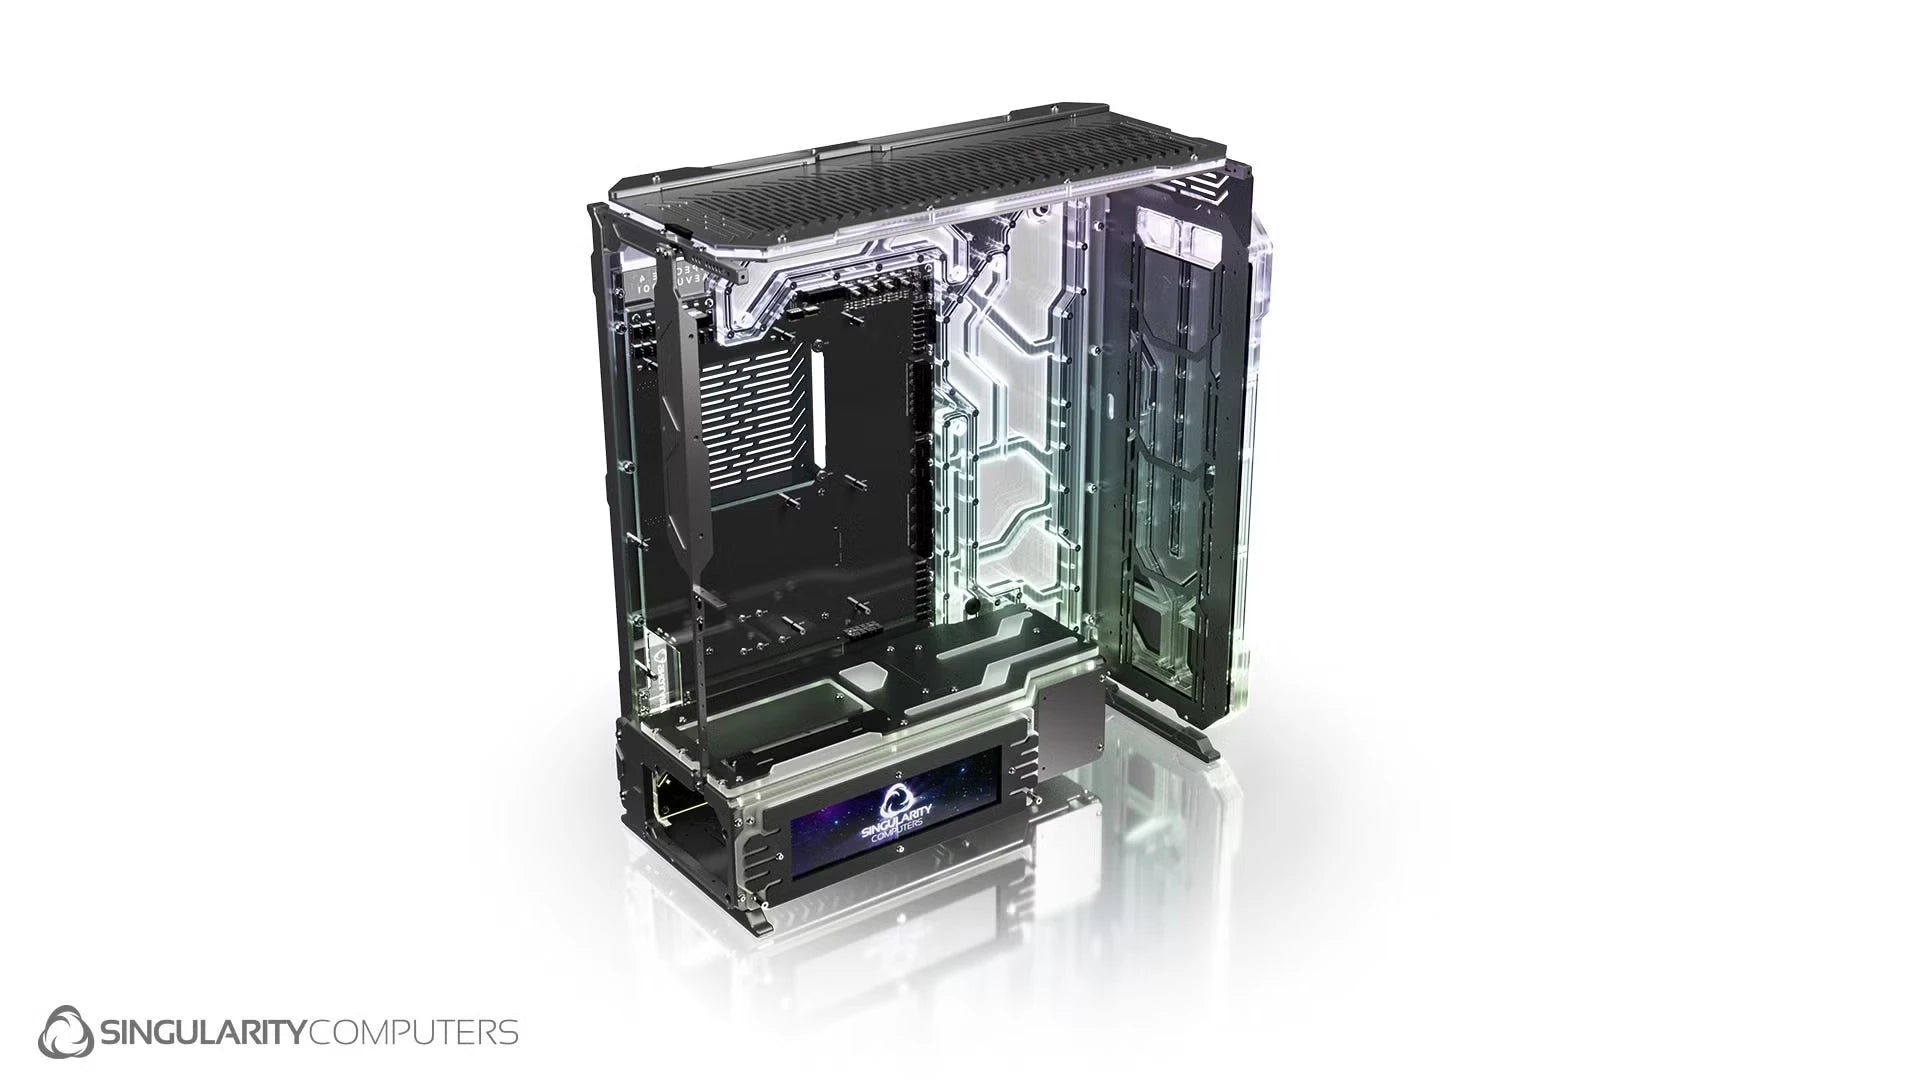 Singularity Computers Spectre 4 Aevum Limited Edition Water-cooling Case Media 1 of 14 Ordinary Cooling Gear Australia